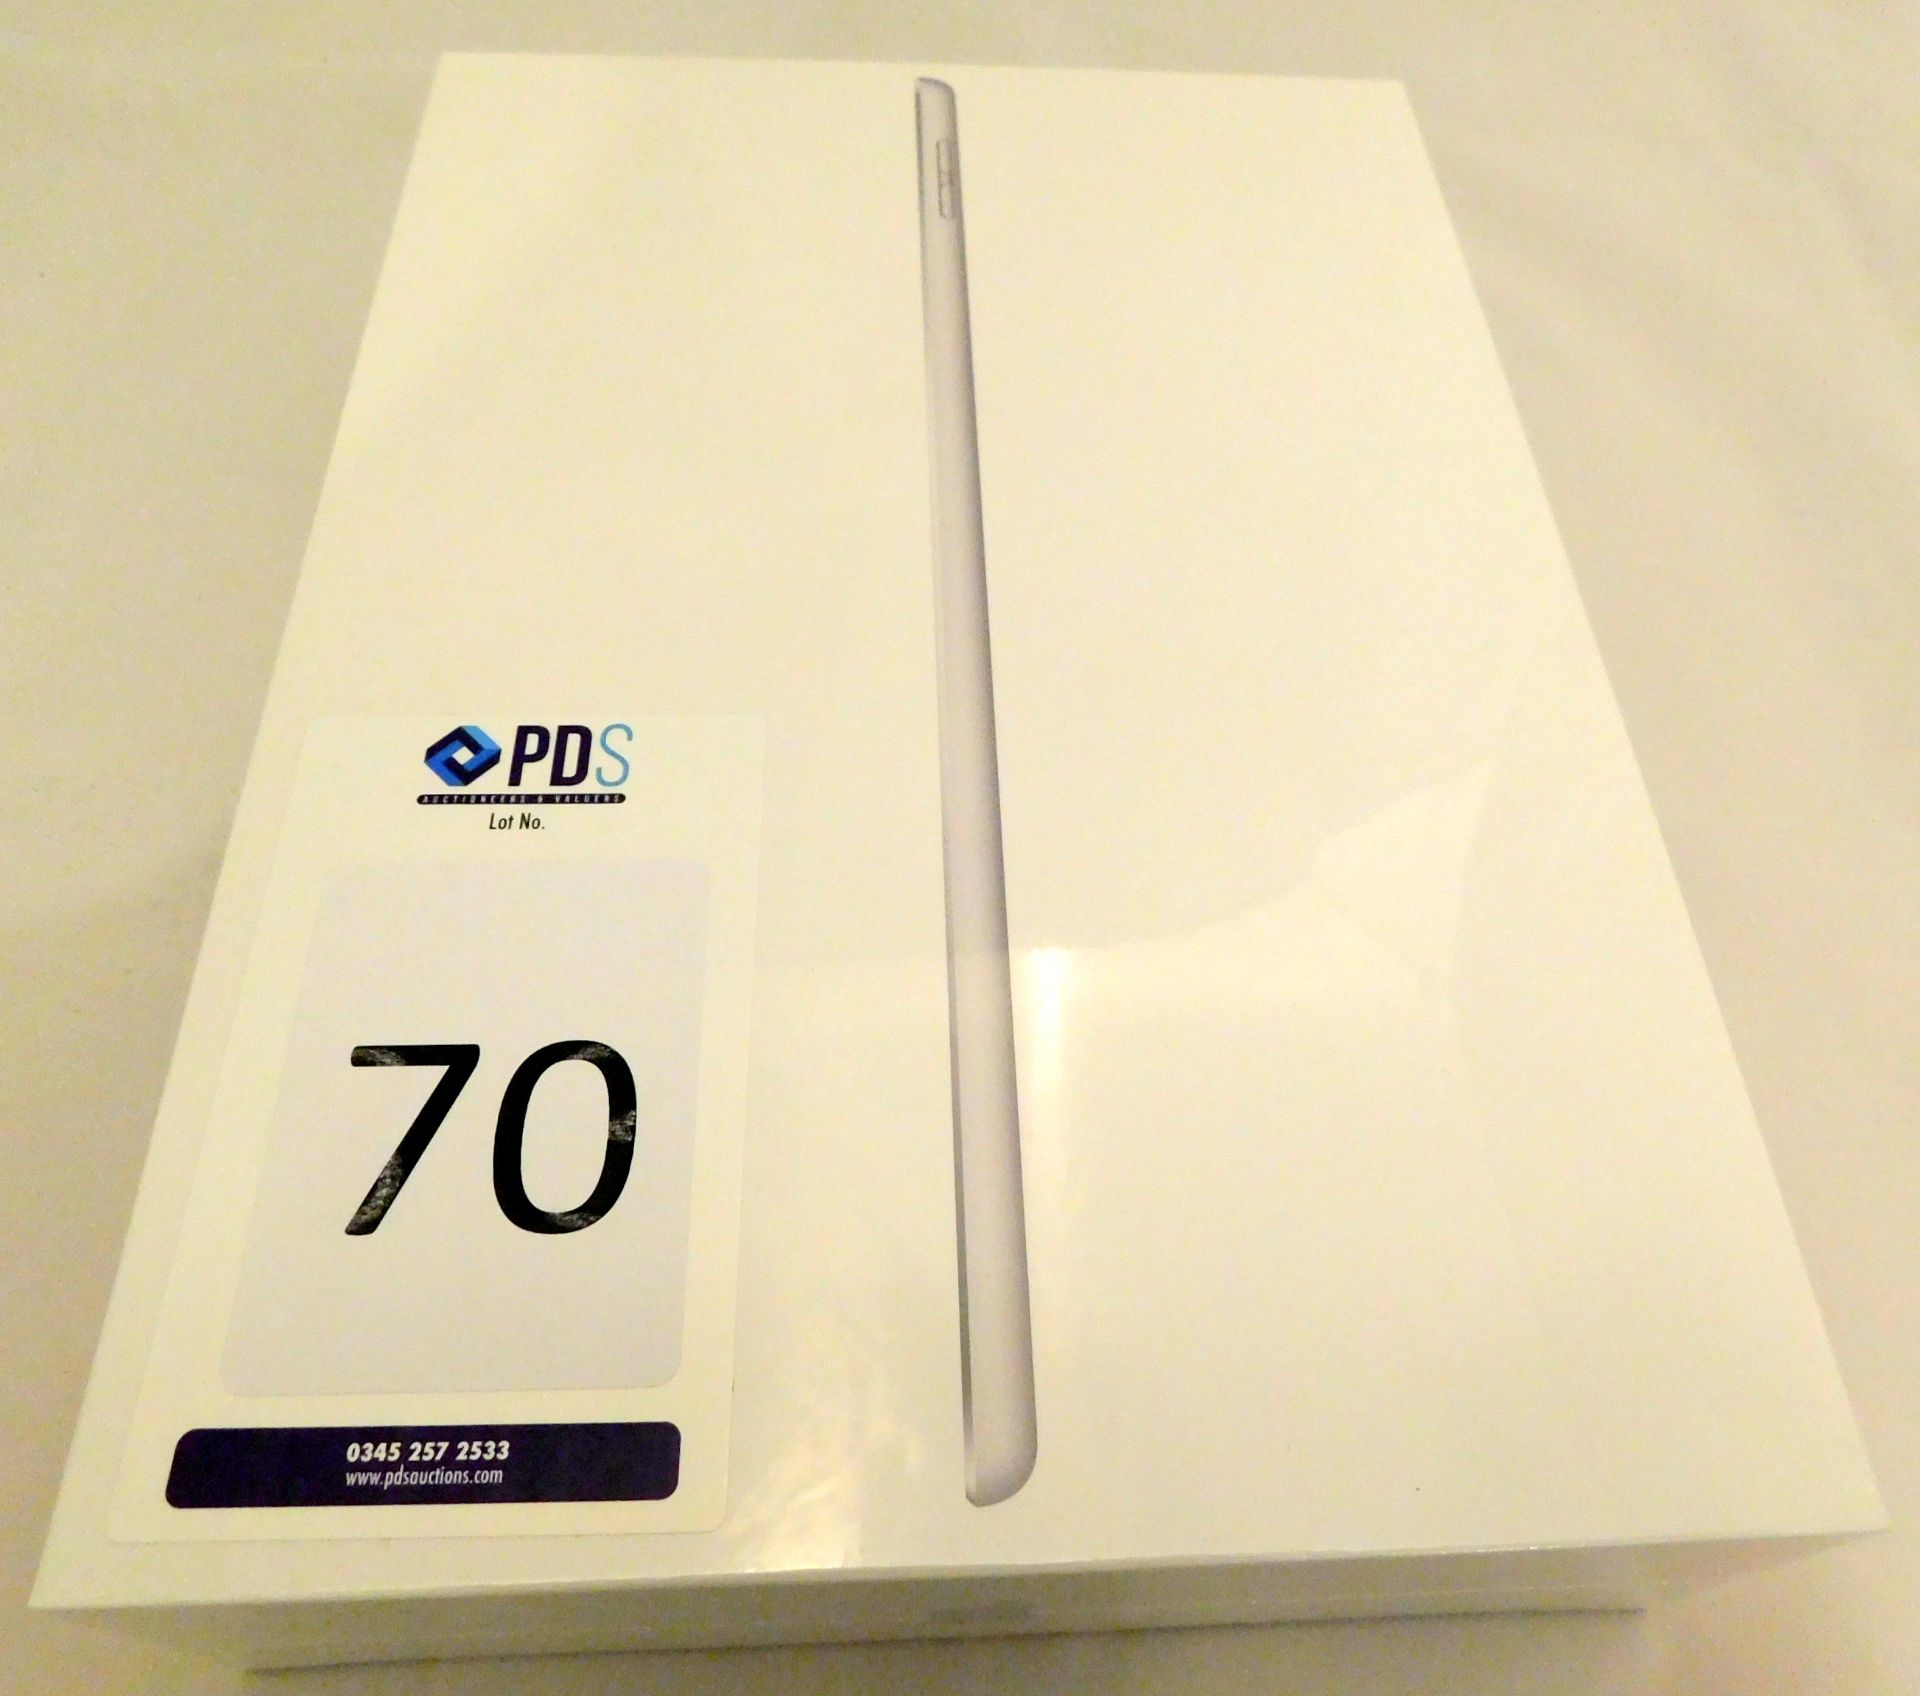 Apple A2197 iPad, 7th Gen, 32GB, Silver, Serial Number: DMPC8118MF3N, (New in Sealed Box) (Located